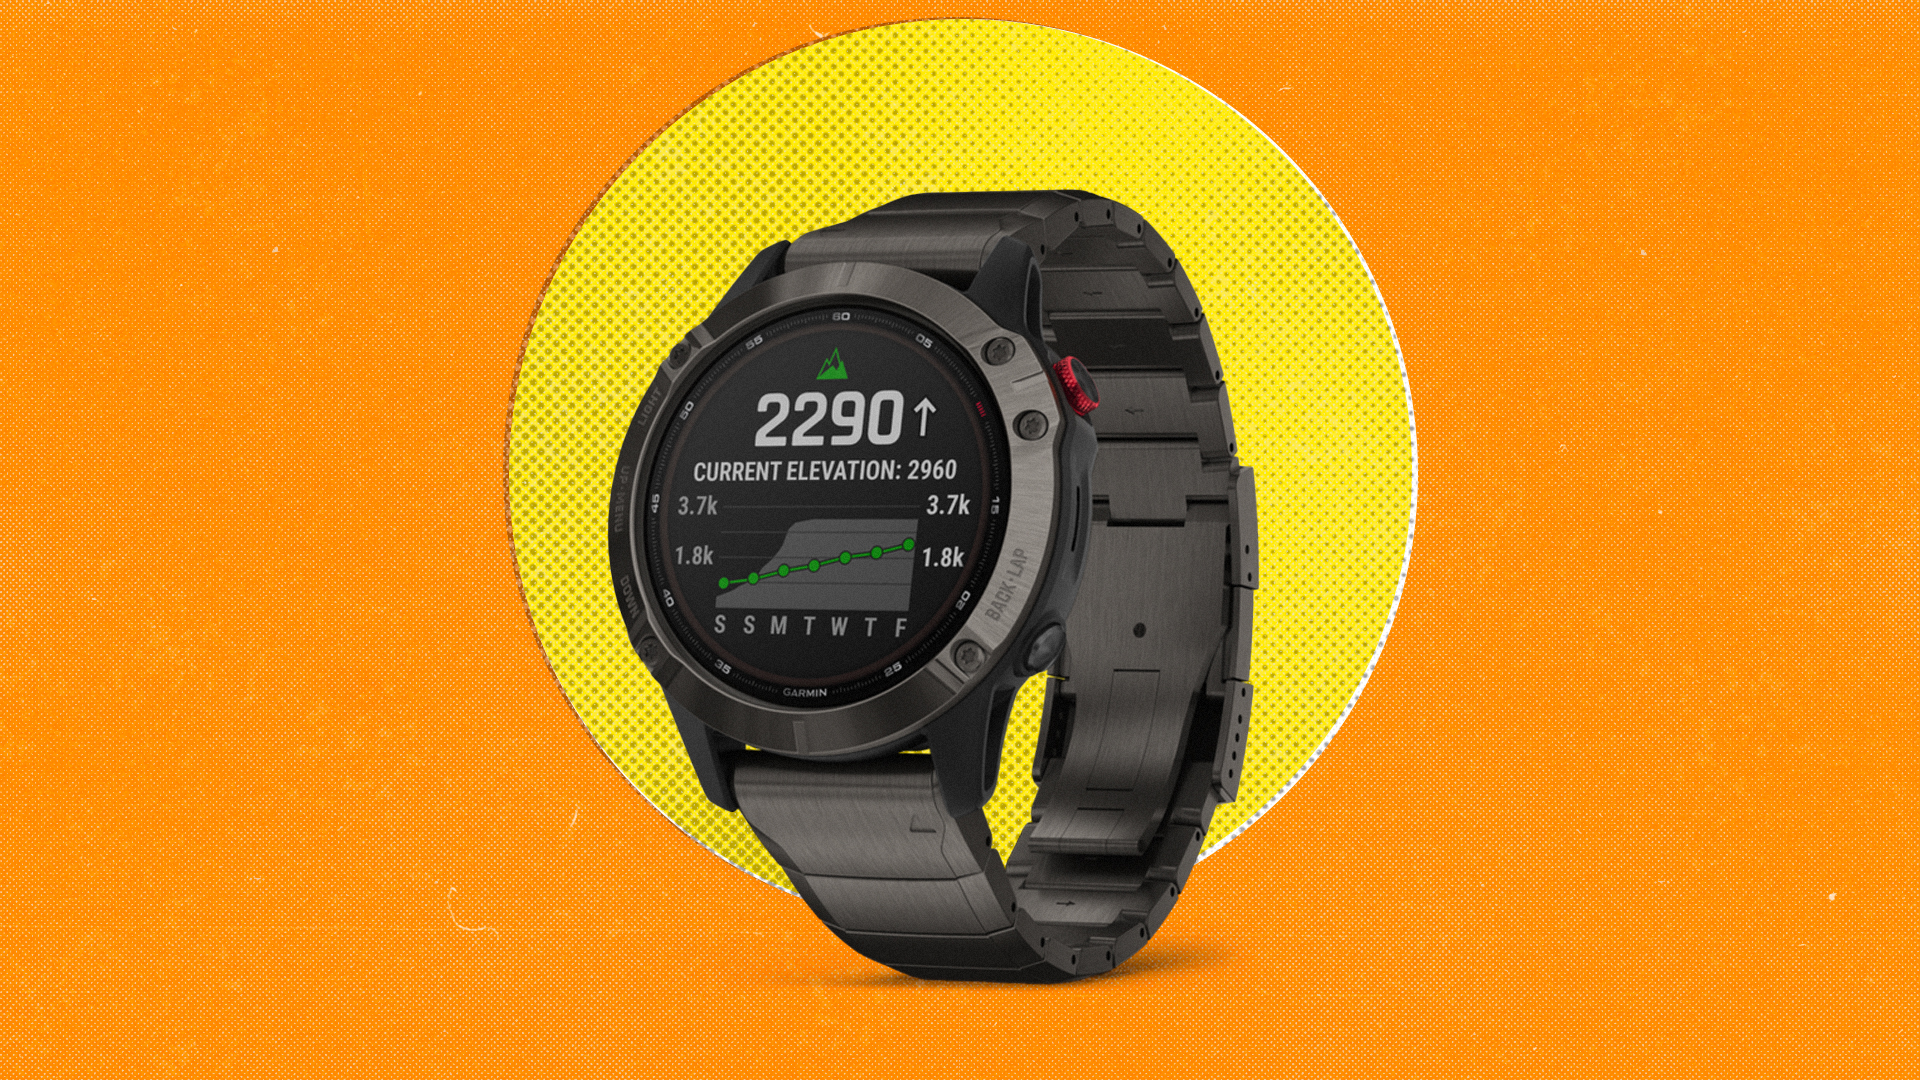 The Solar-Powered Smartwatch With A Battery That Lasts Weeks | Style